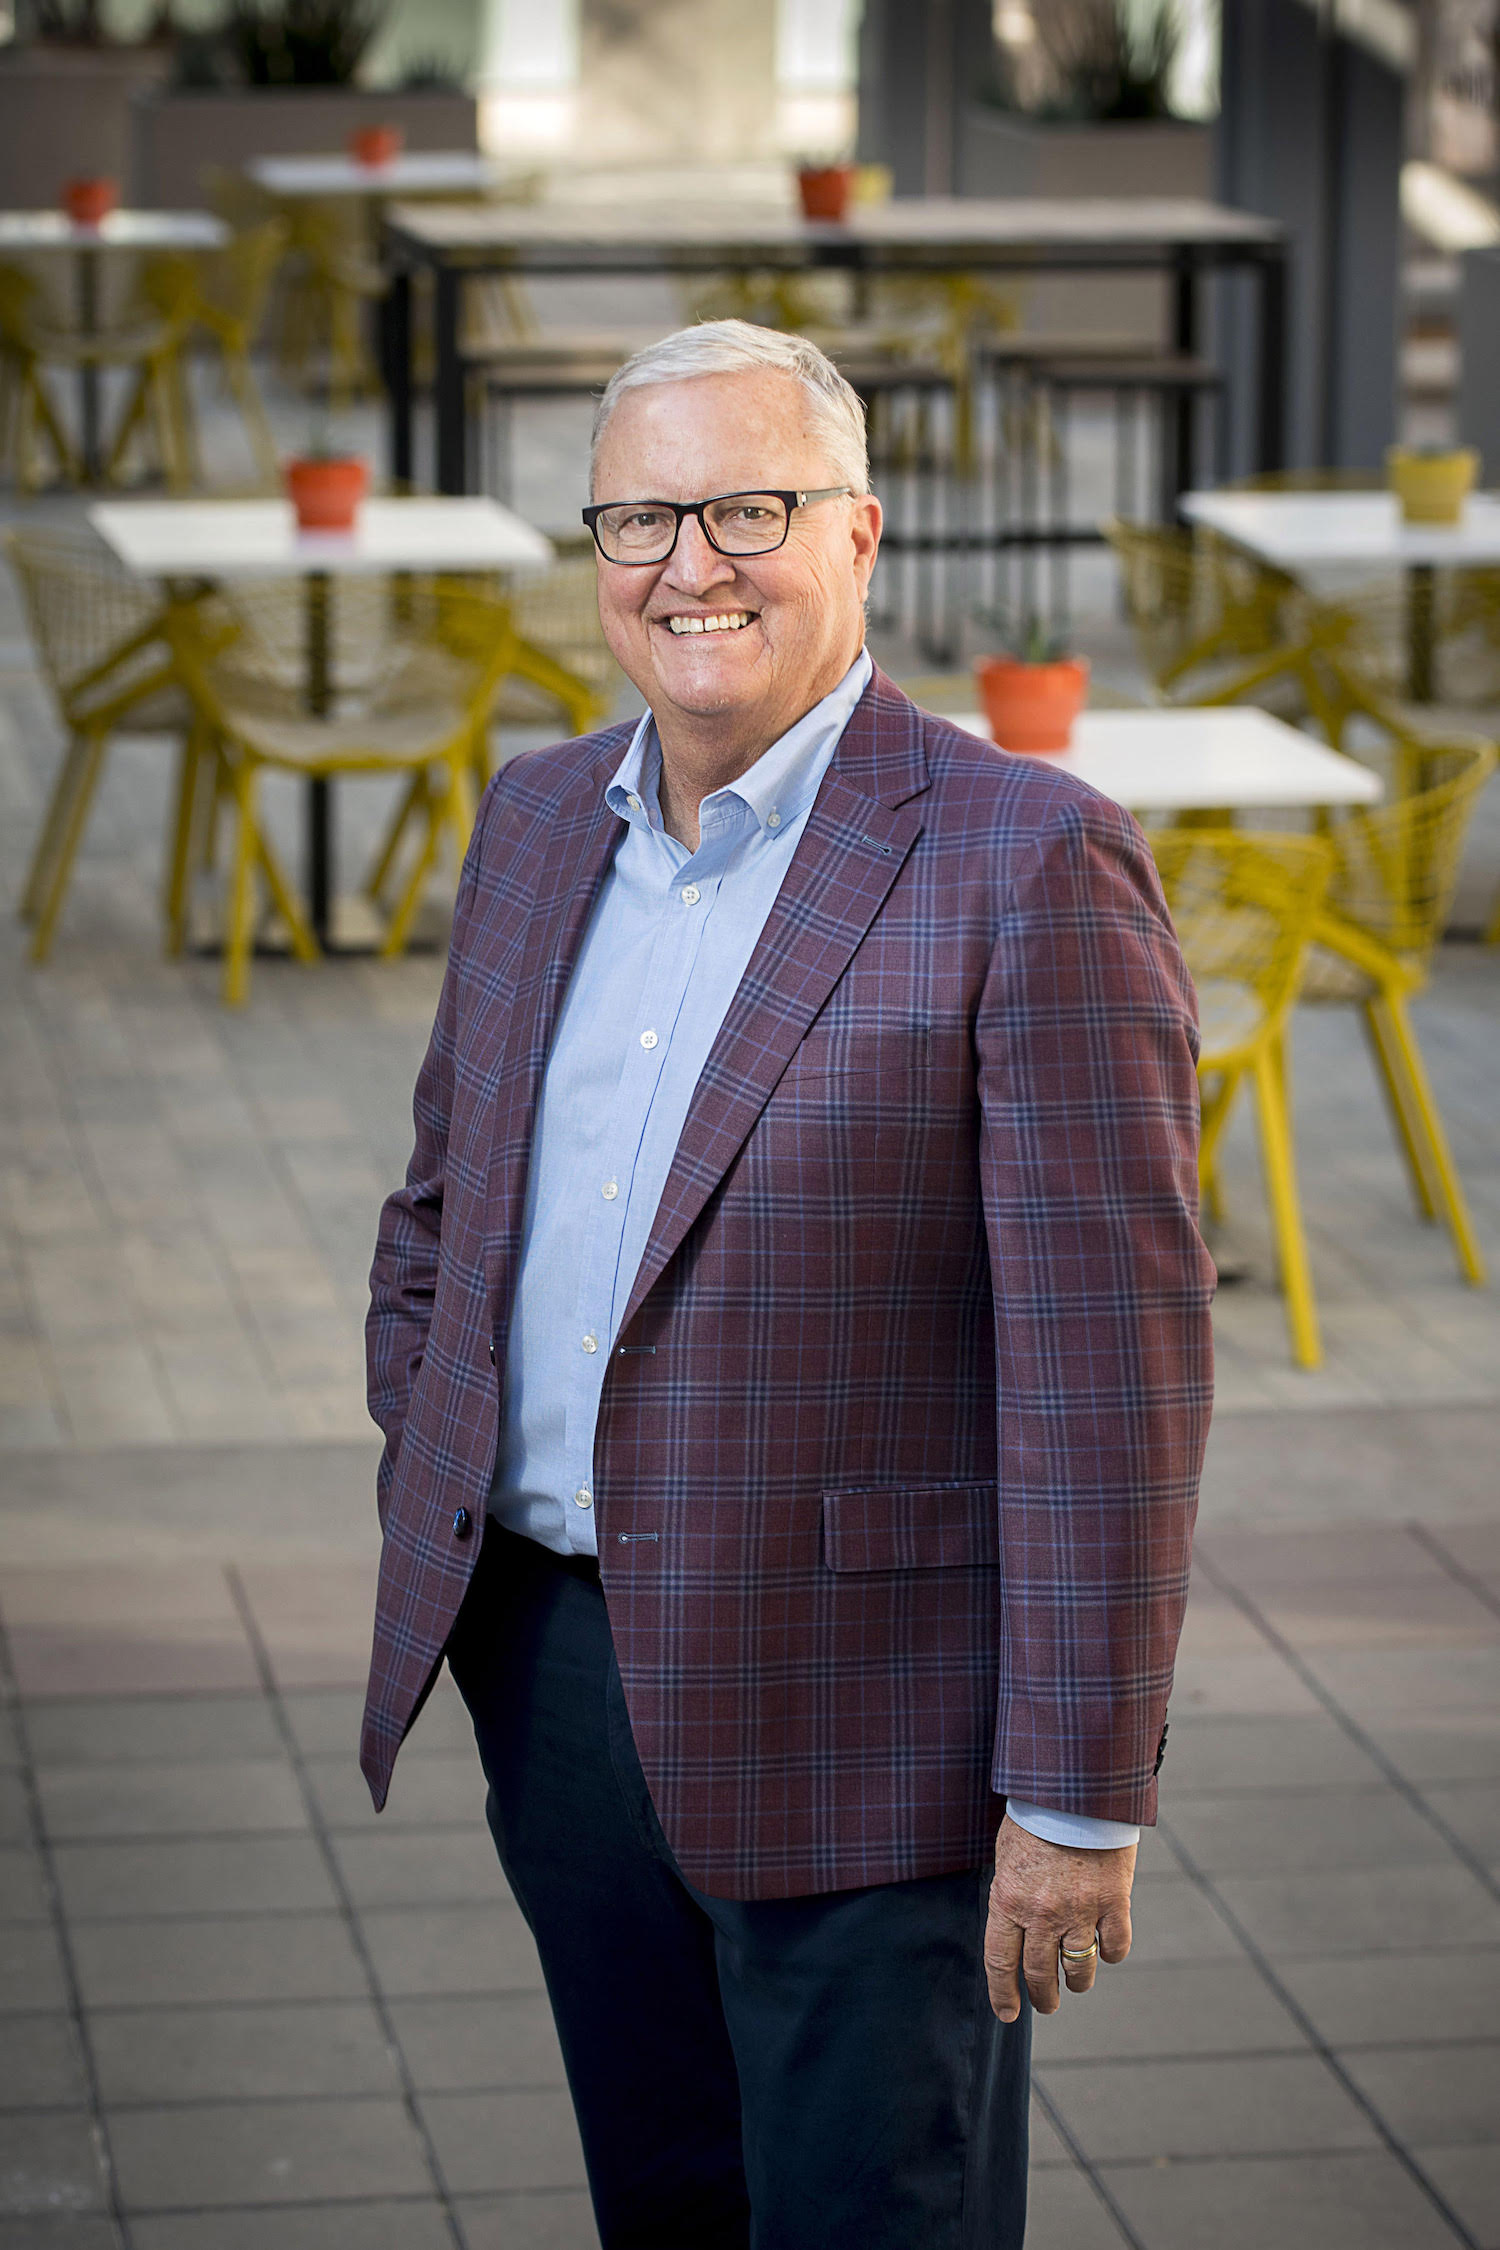 Transwestern has appointed Jim Fijan as Executive Managing Partner to drive continued growth in Phoenix while fostering a collaborative and engaging environment throughout the region.